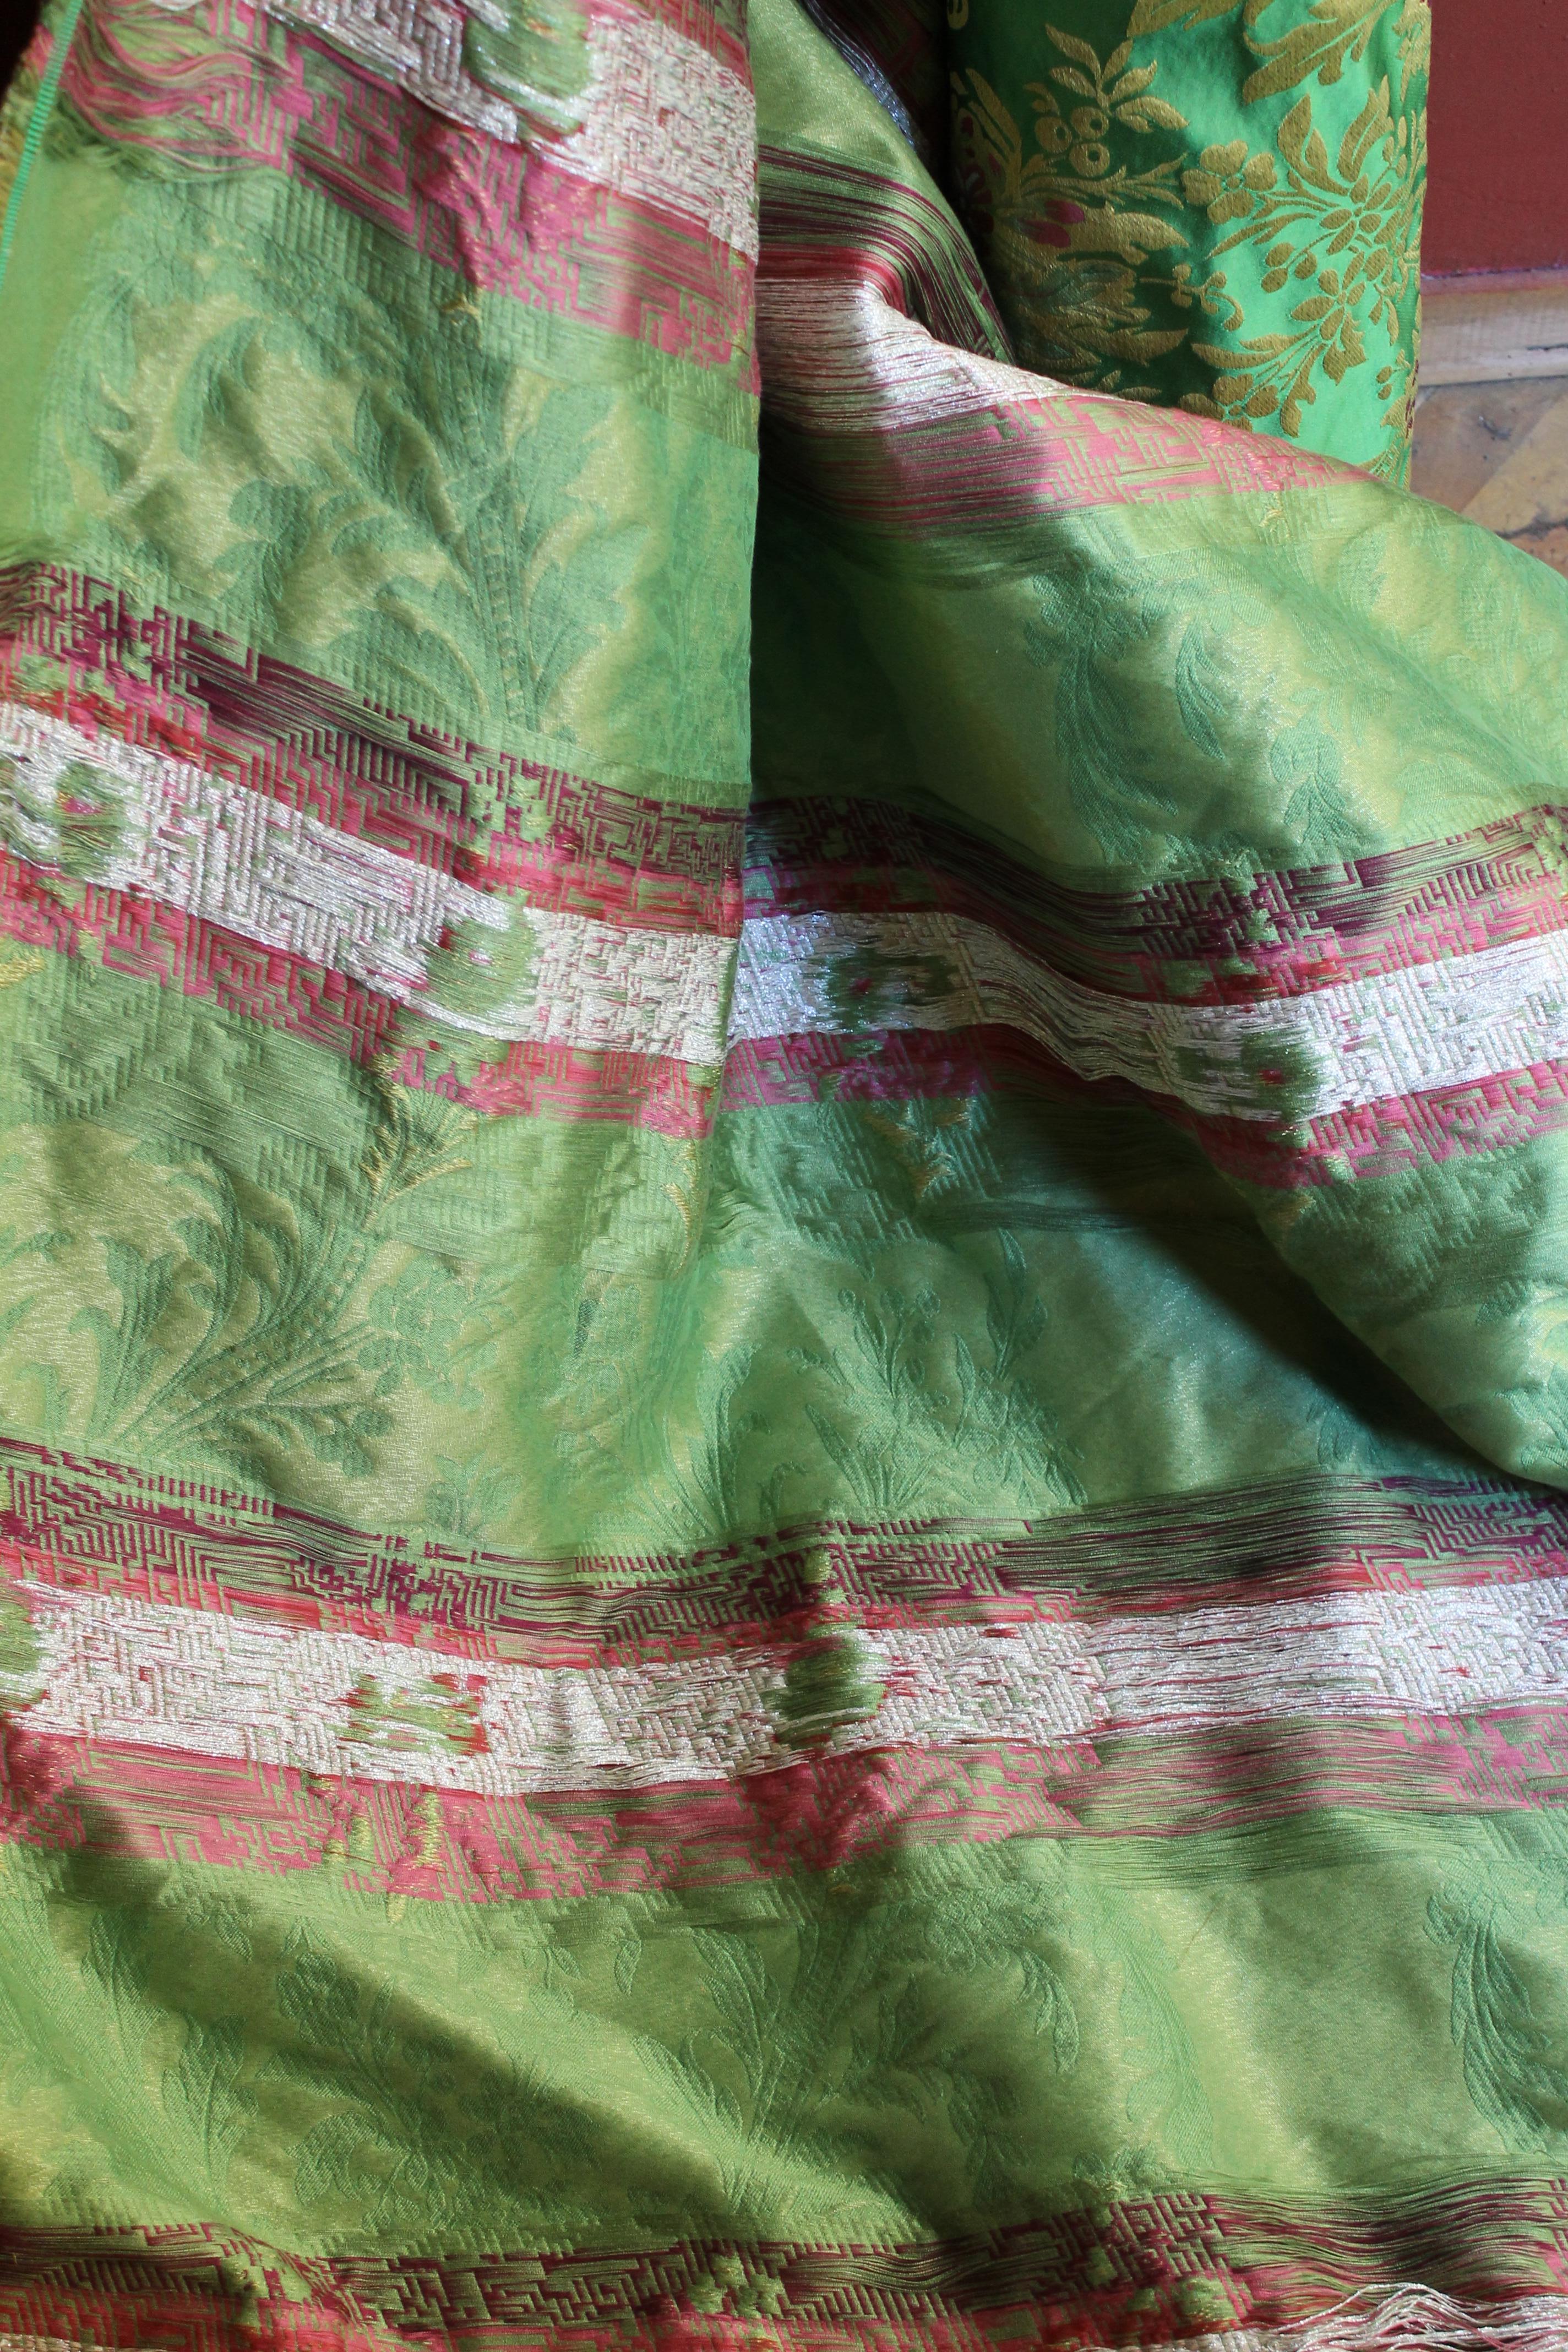 Metallic Thread Italian Green Silk Blend Brocade Fabric with Red Roses and Gold Floral Patterns For Sale